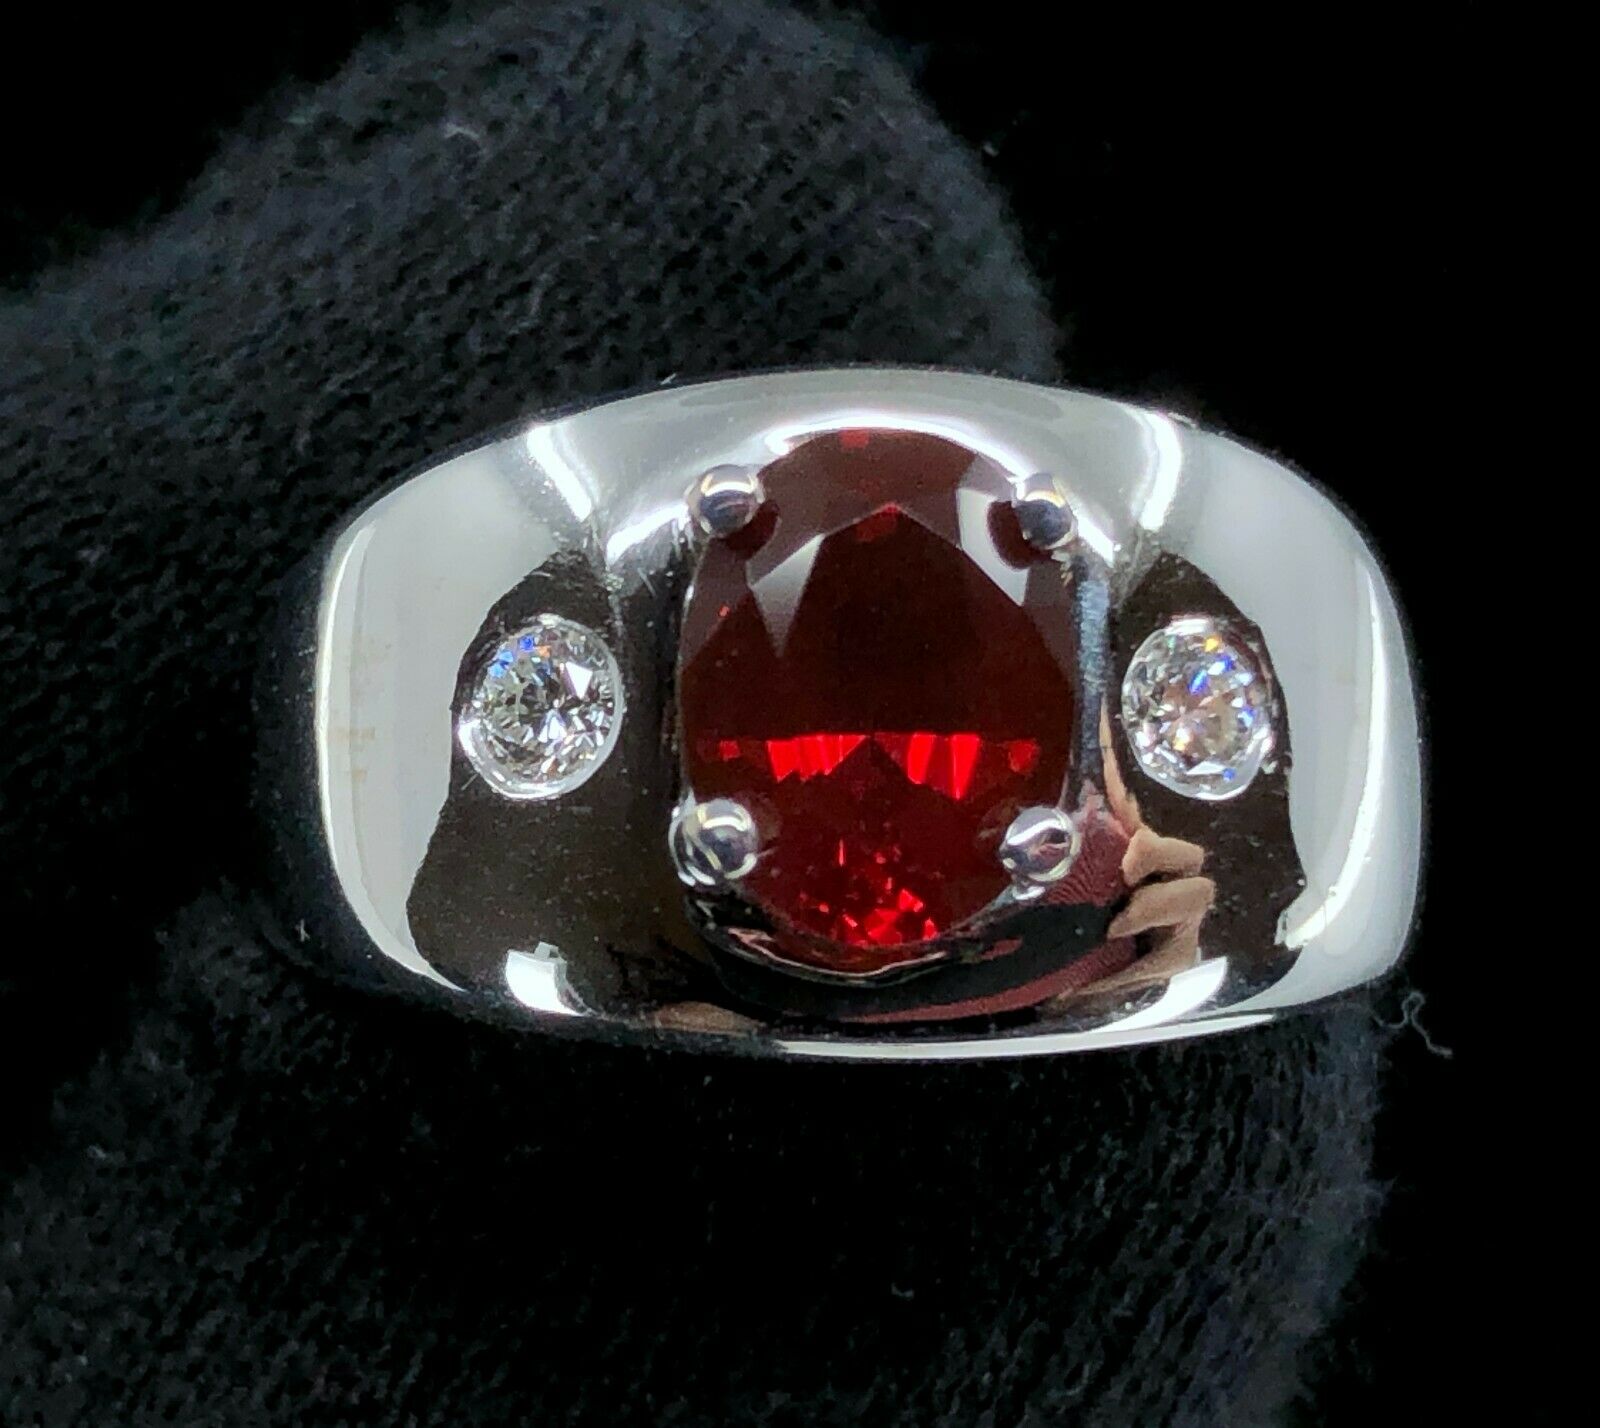 High Quality Red Fire Opal & Diamond Ring in 14K White Gold